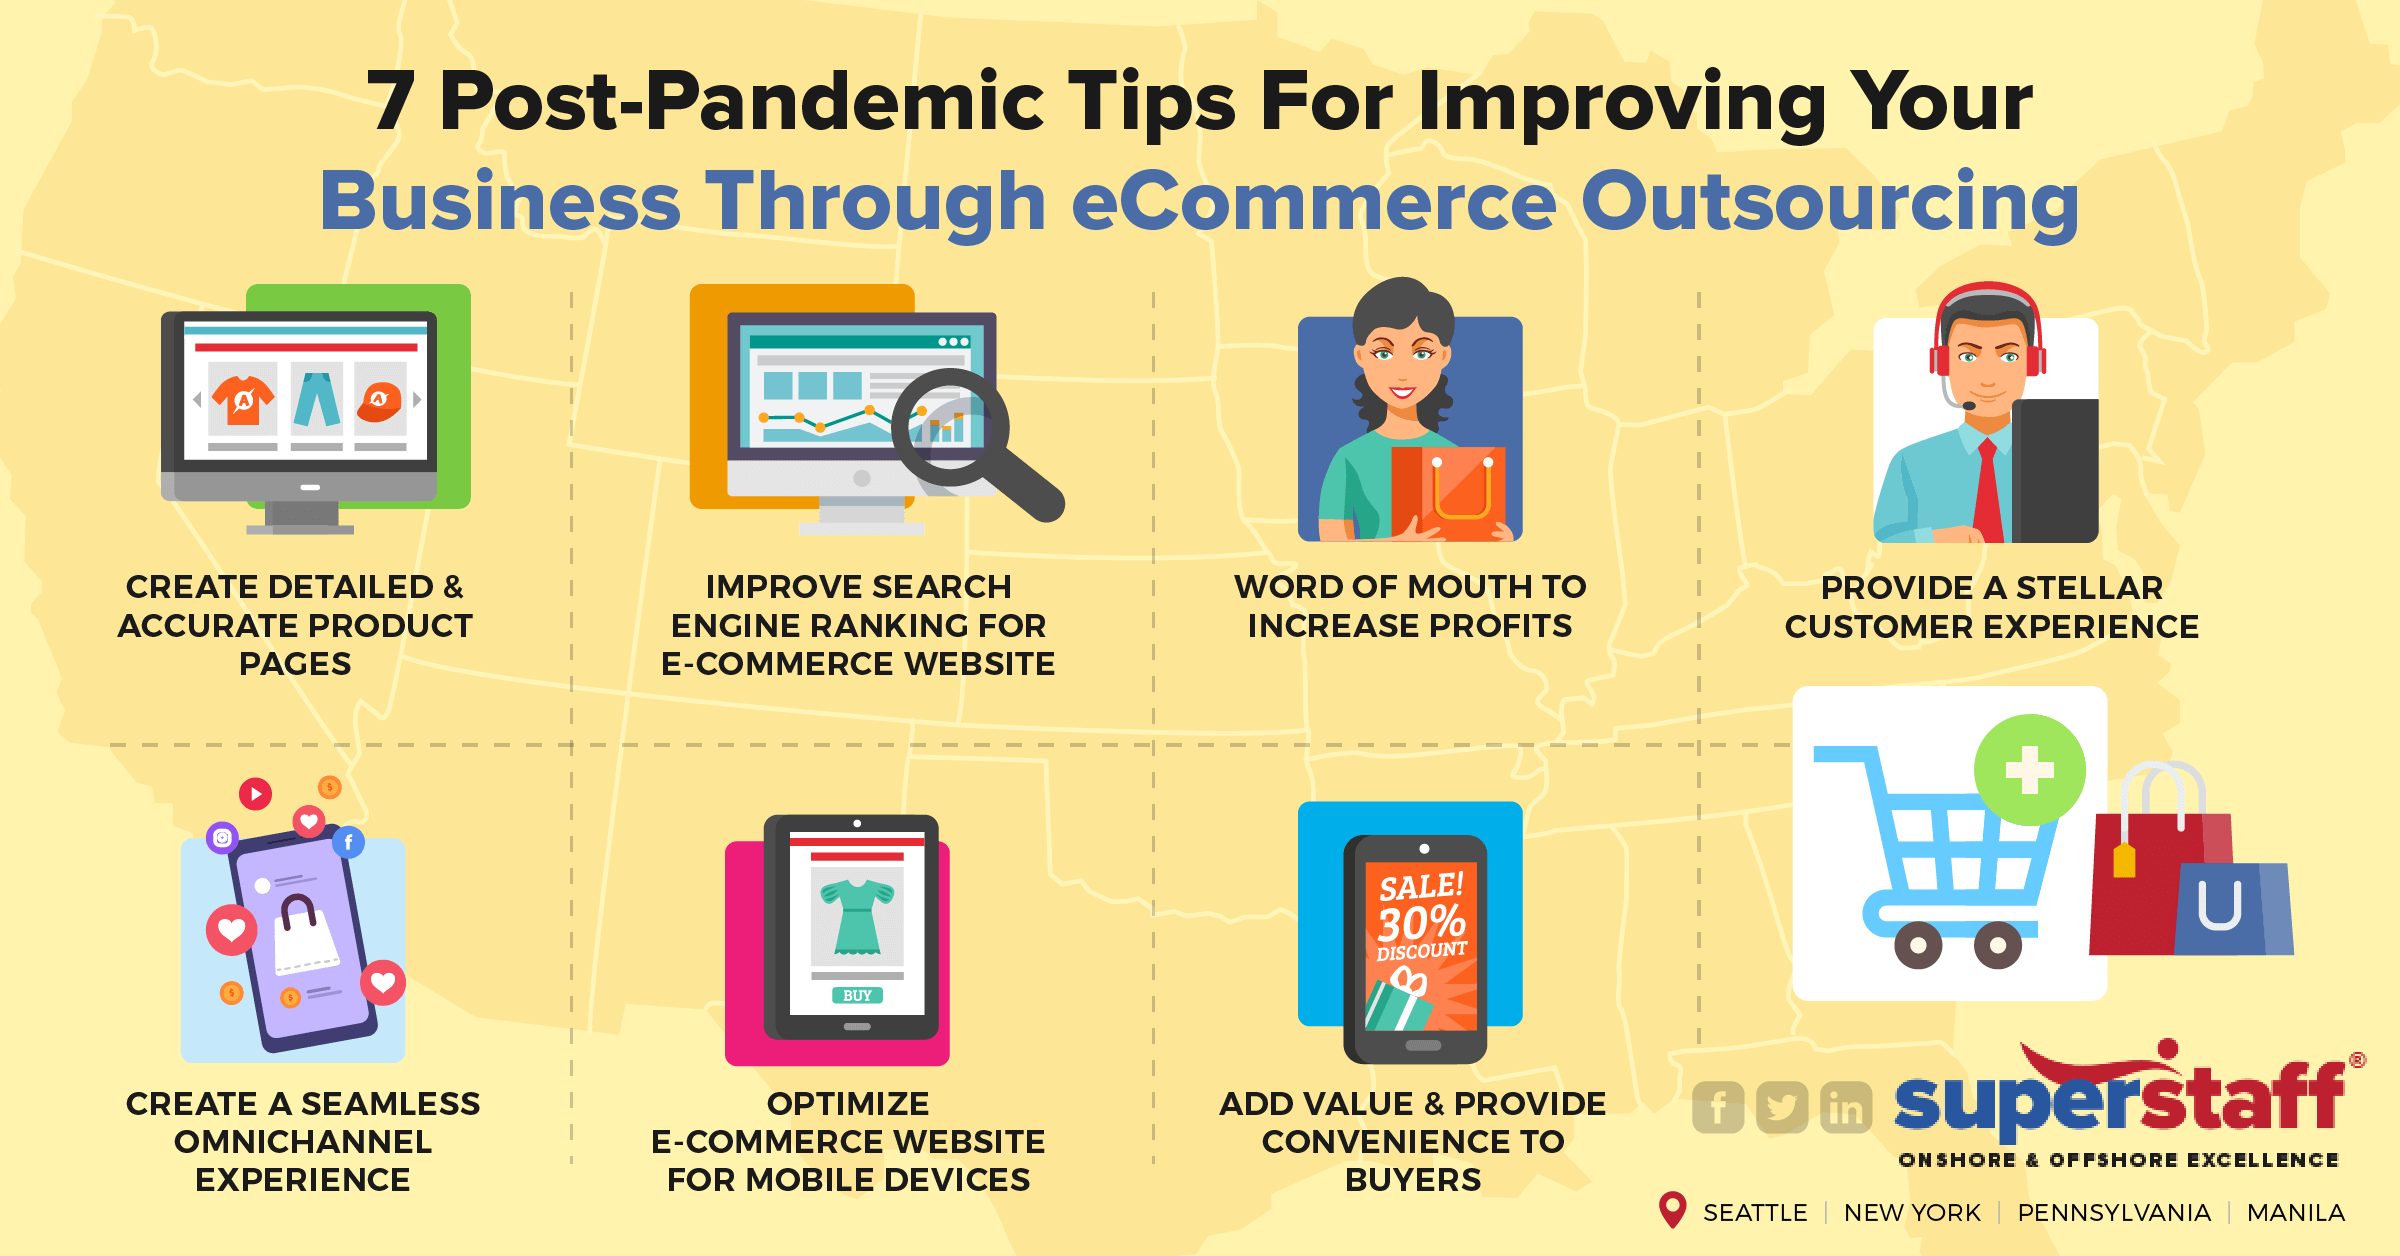 7 Tips For Improving Business Through eCommerce Outsourcing